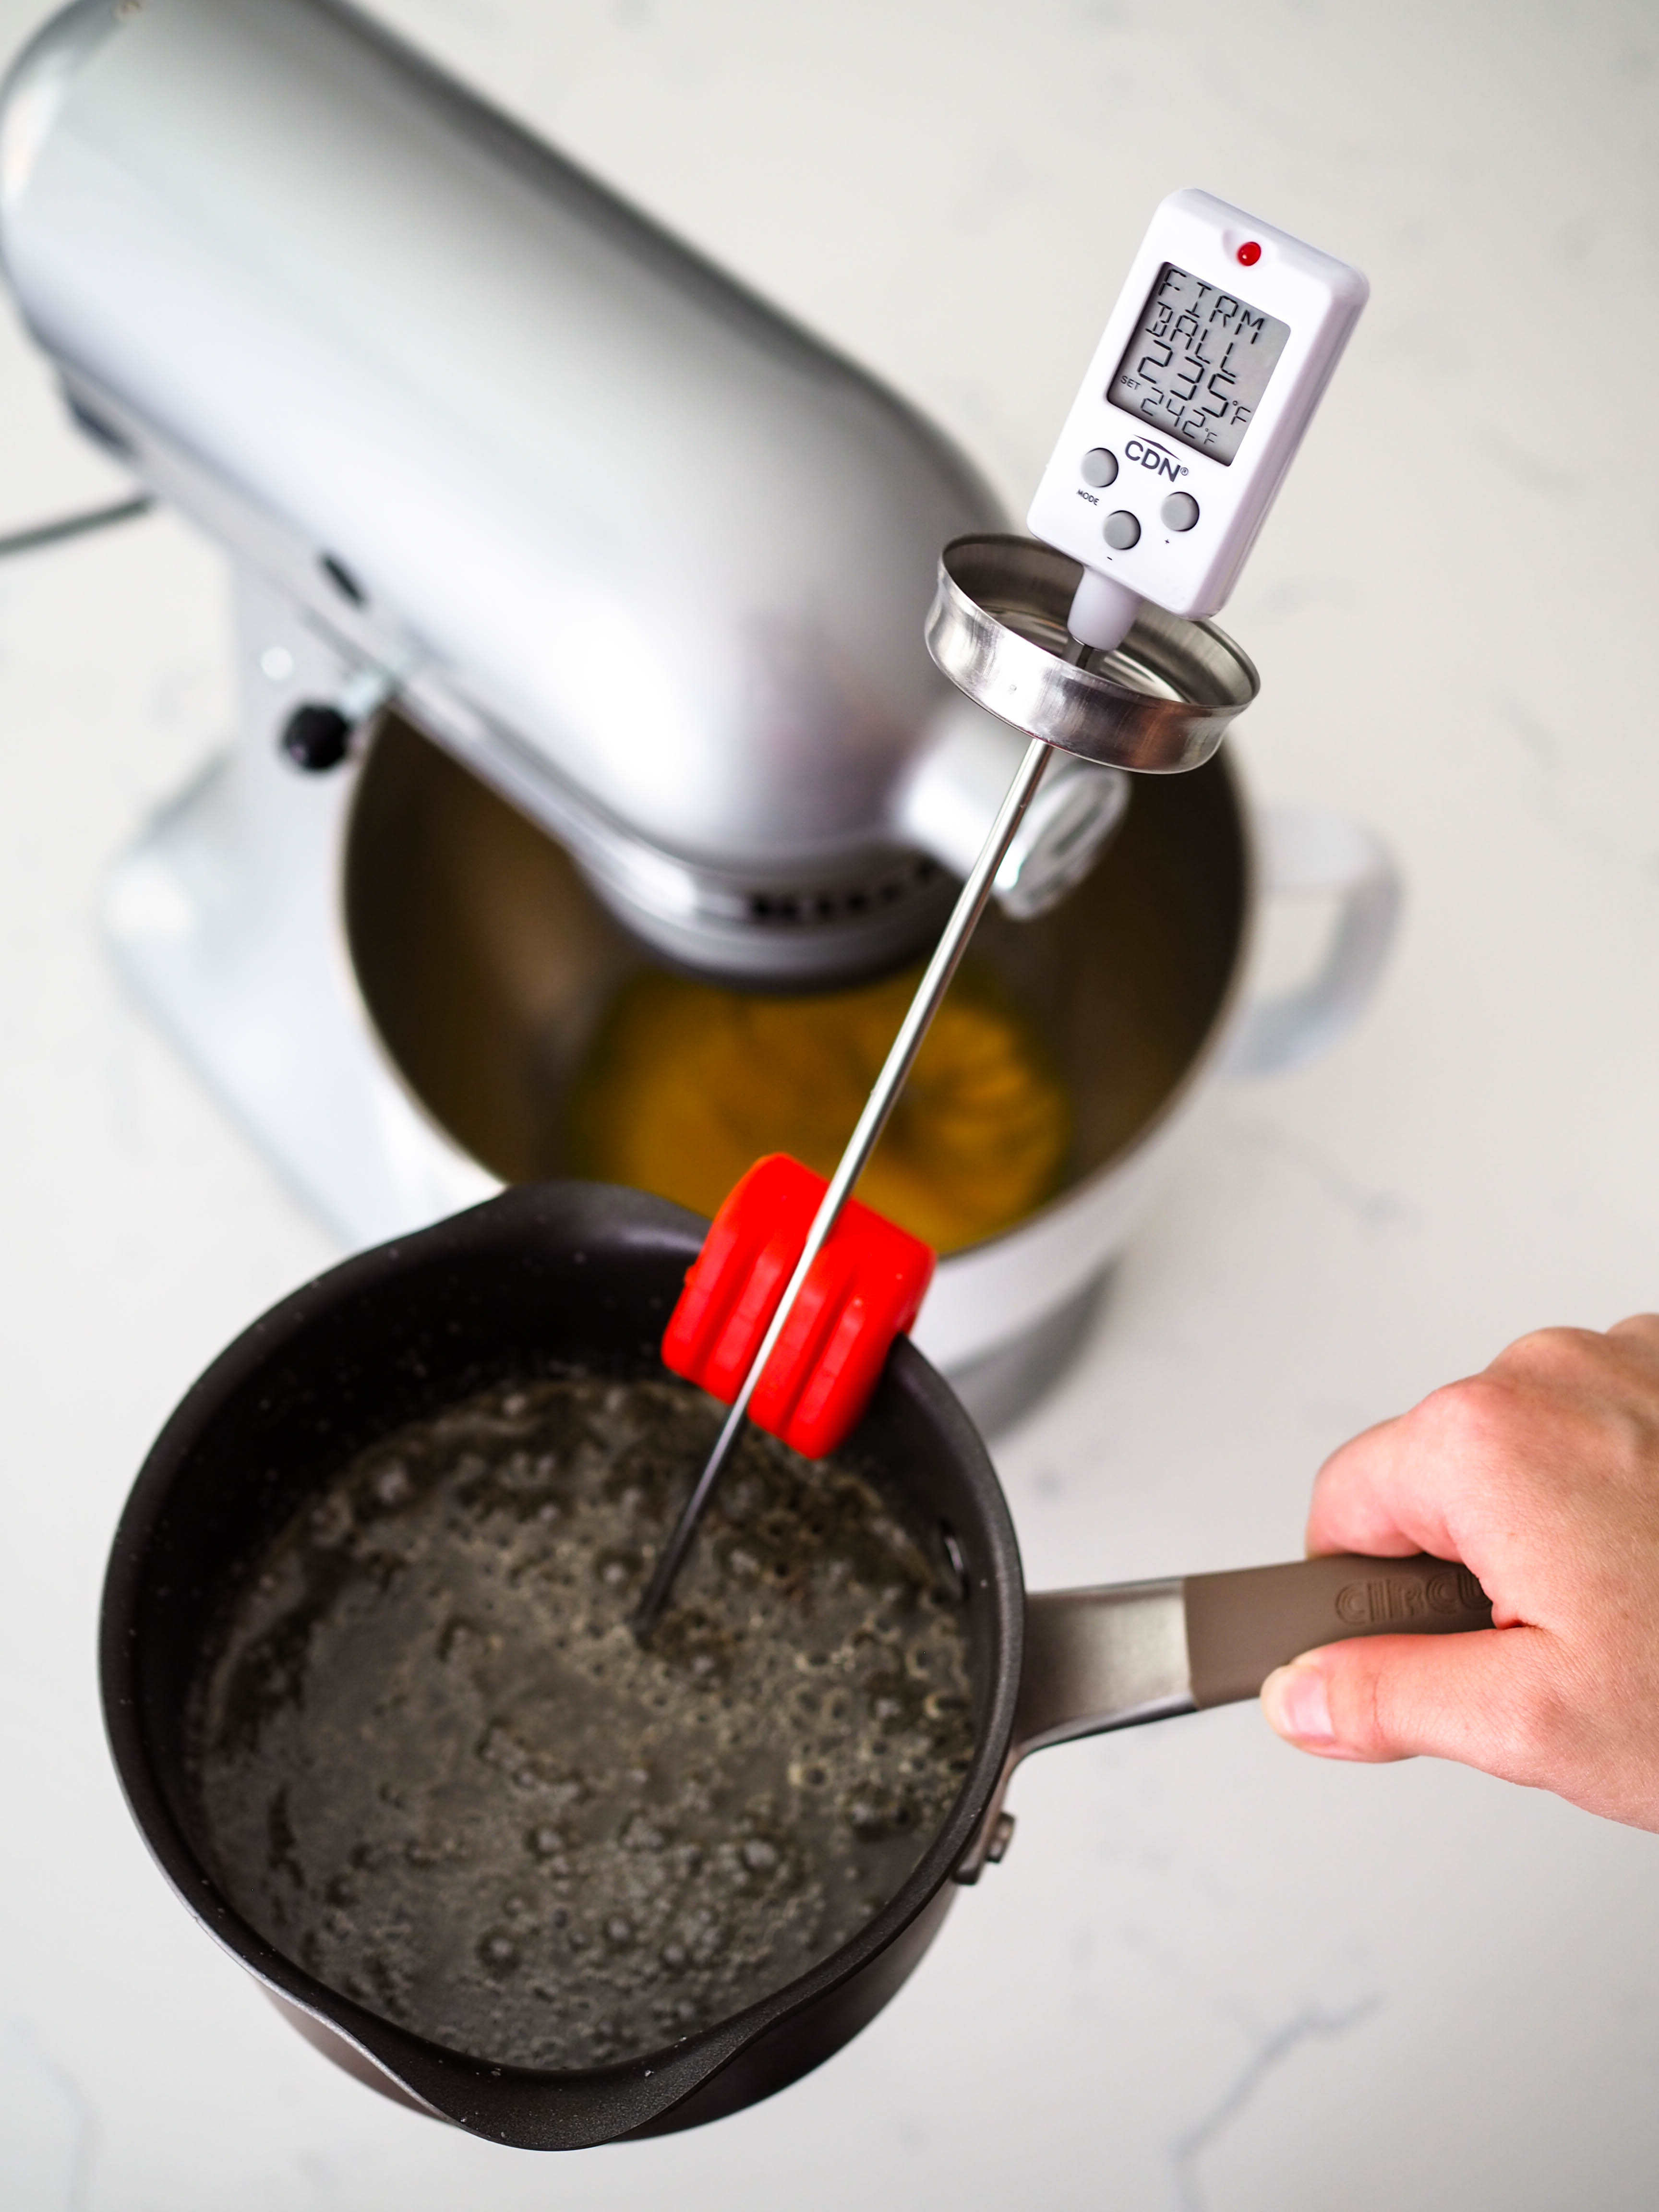 A candy thermometer shows the temperature of the sugar syrup in front of a stand mixer.